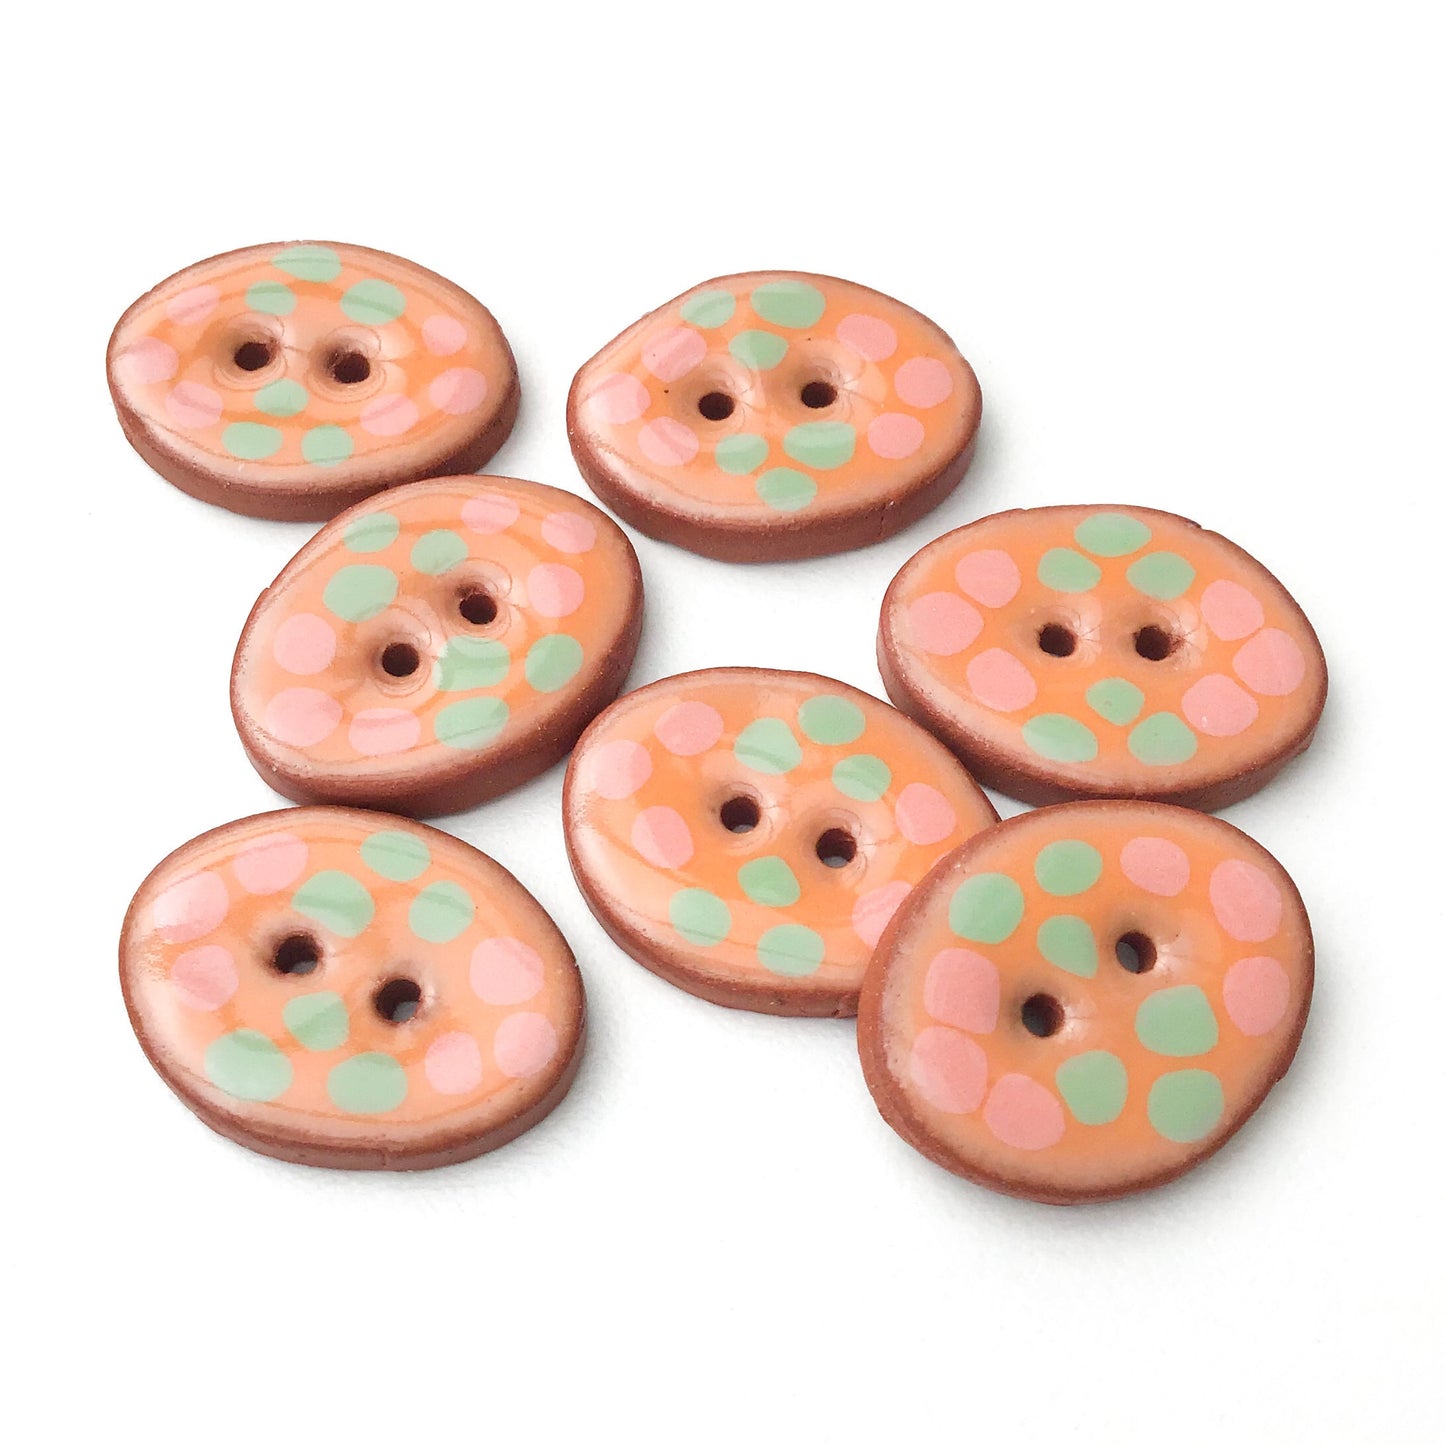 Decorative Oval Ceramic Buttons - Sorbet Orange with Salmon Pink + Mint Green Dot Pattern - 5/8" x 7/8" - 7 Pack